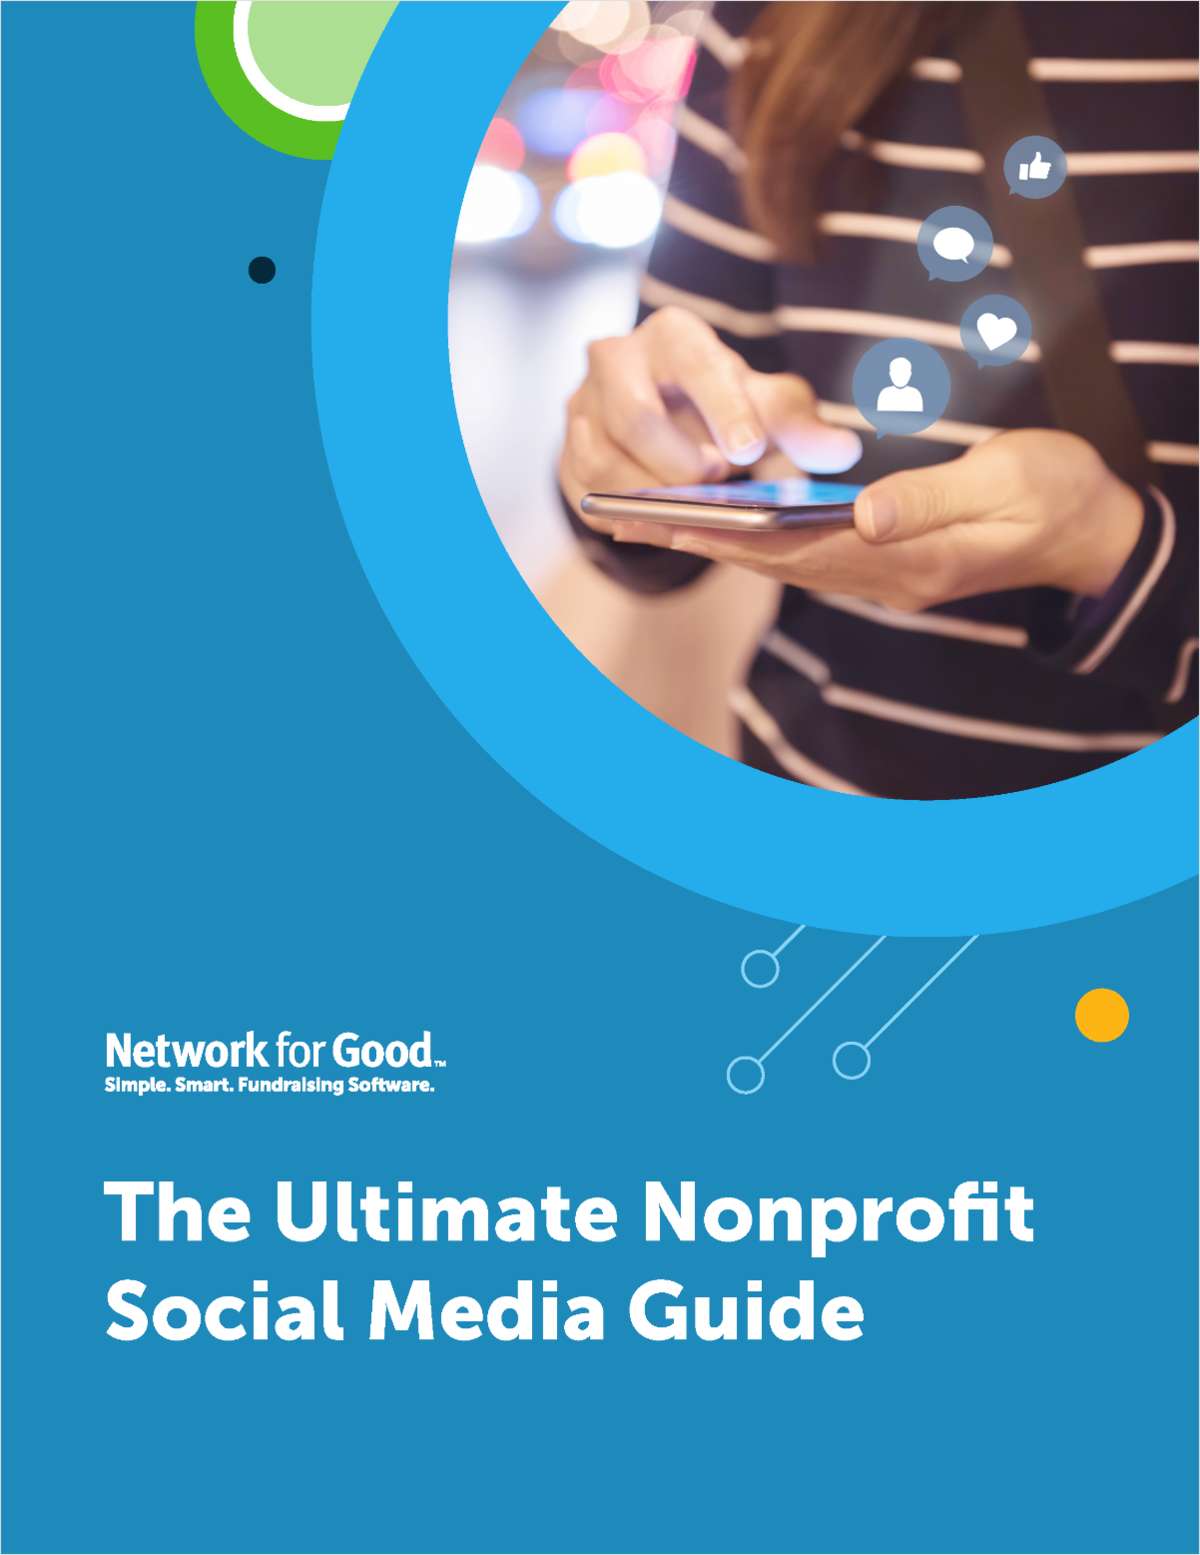 The Ultimate Nonprofit Social Media Guide